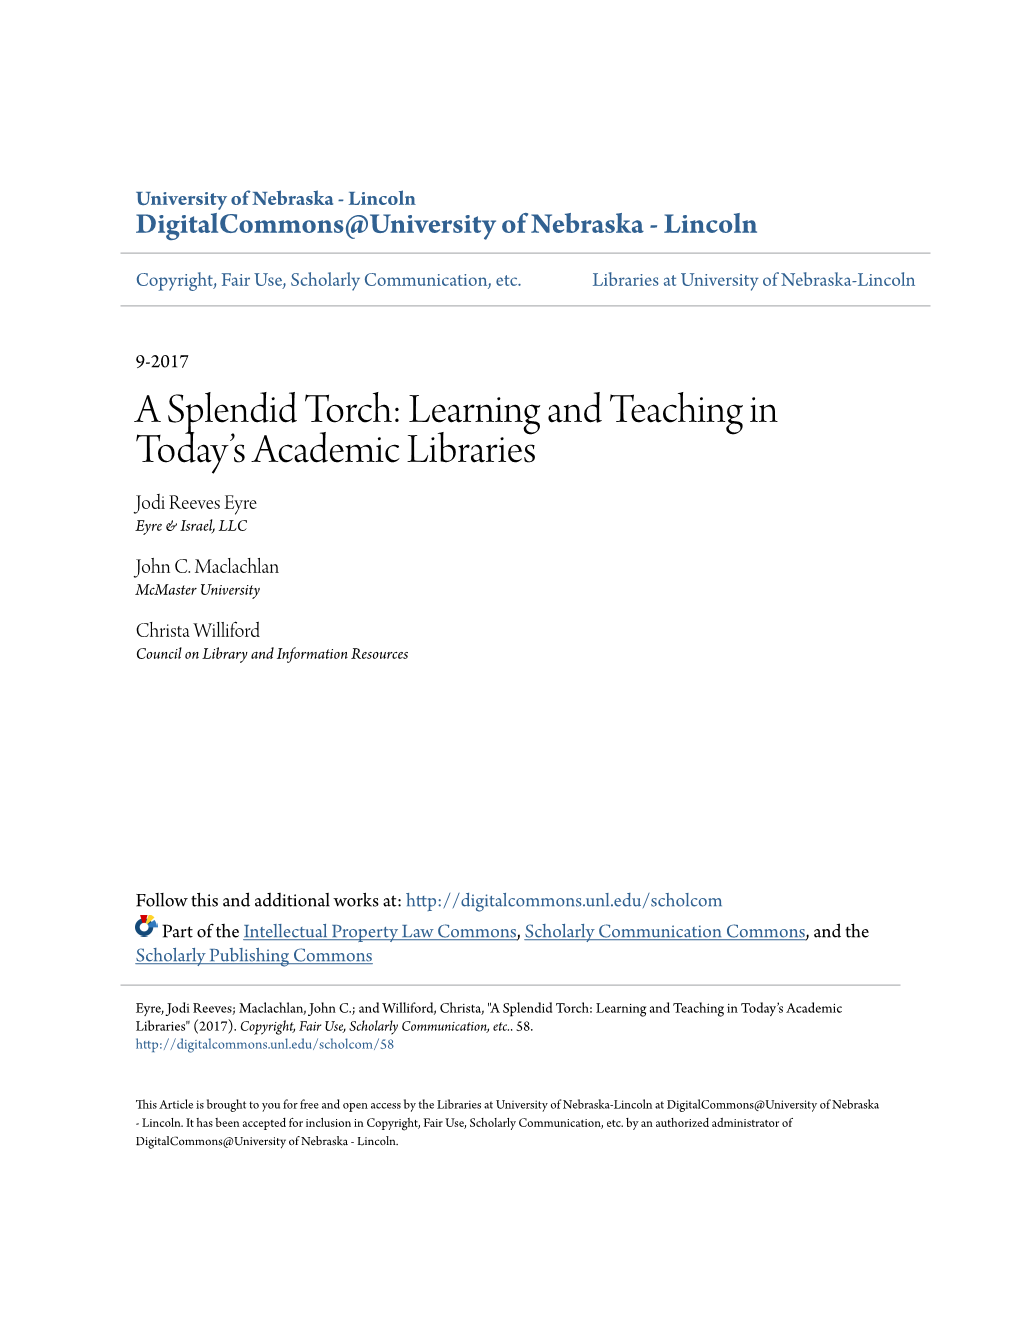 Learning and Teaching in Today's Academic Libraries